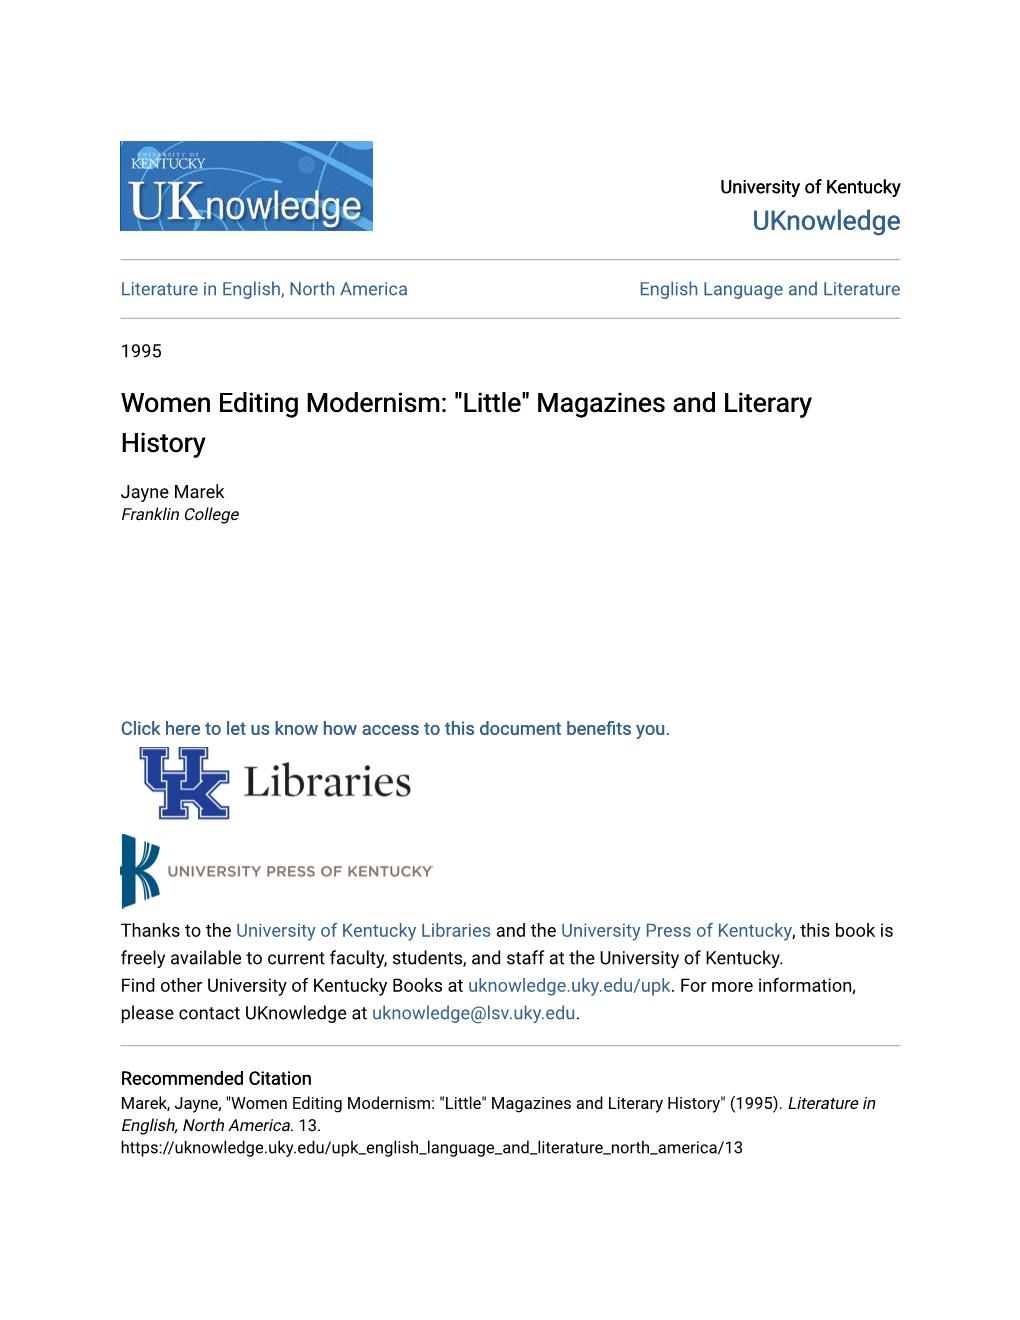 Women Editing Modernism: "Little" Magazines and Literary History